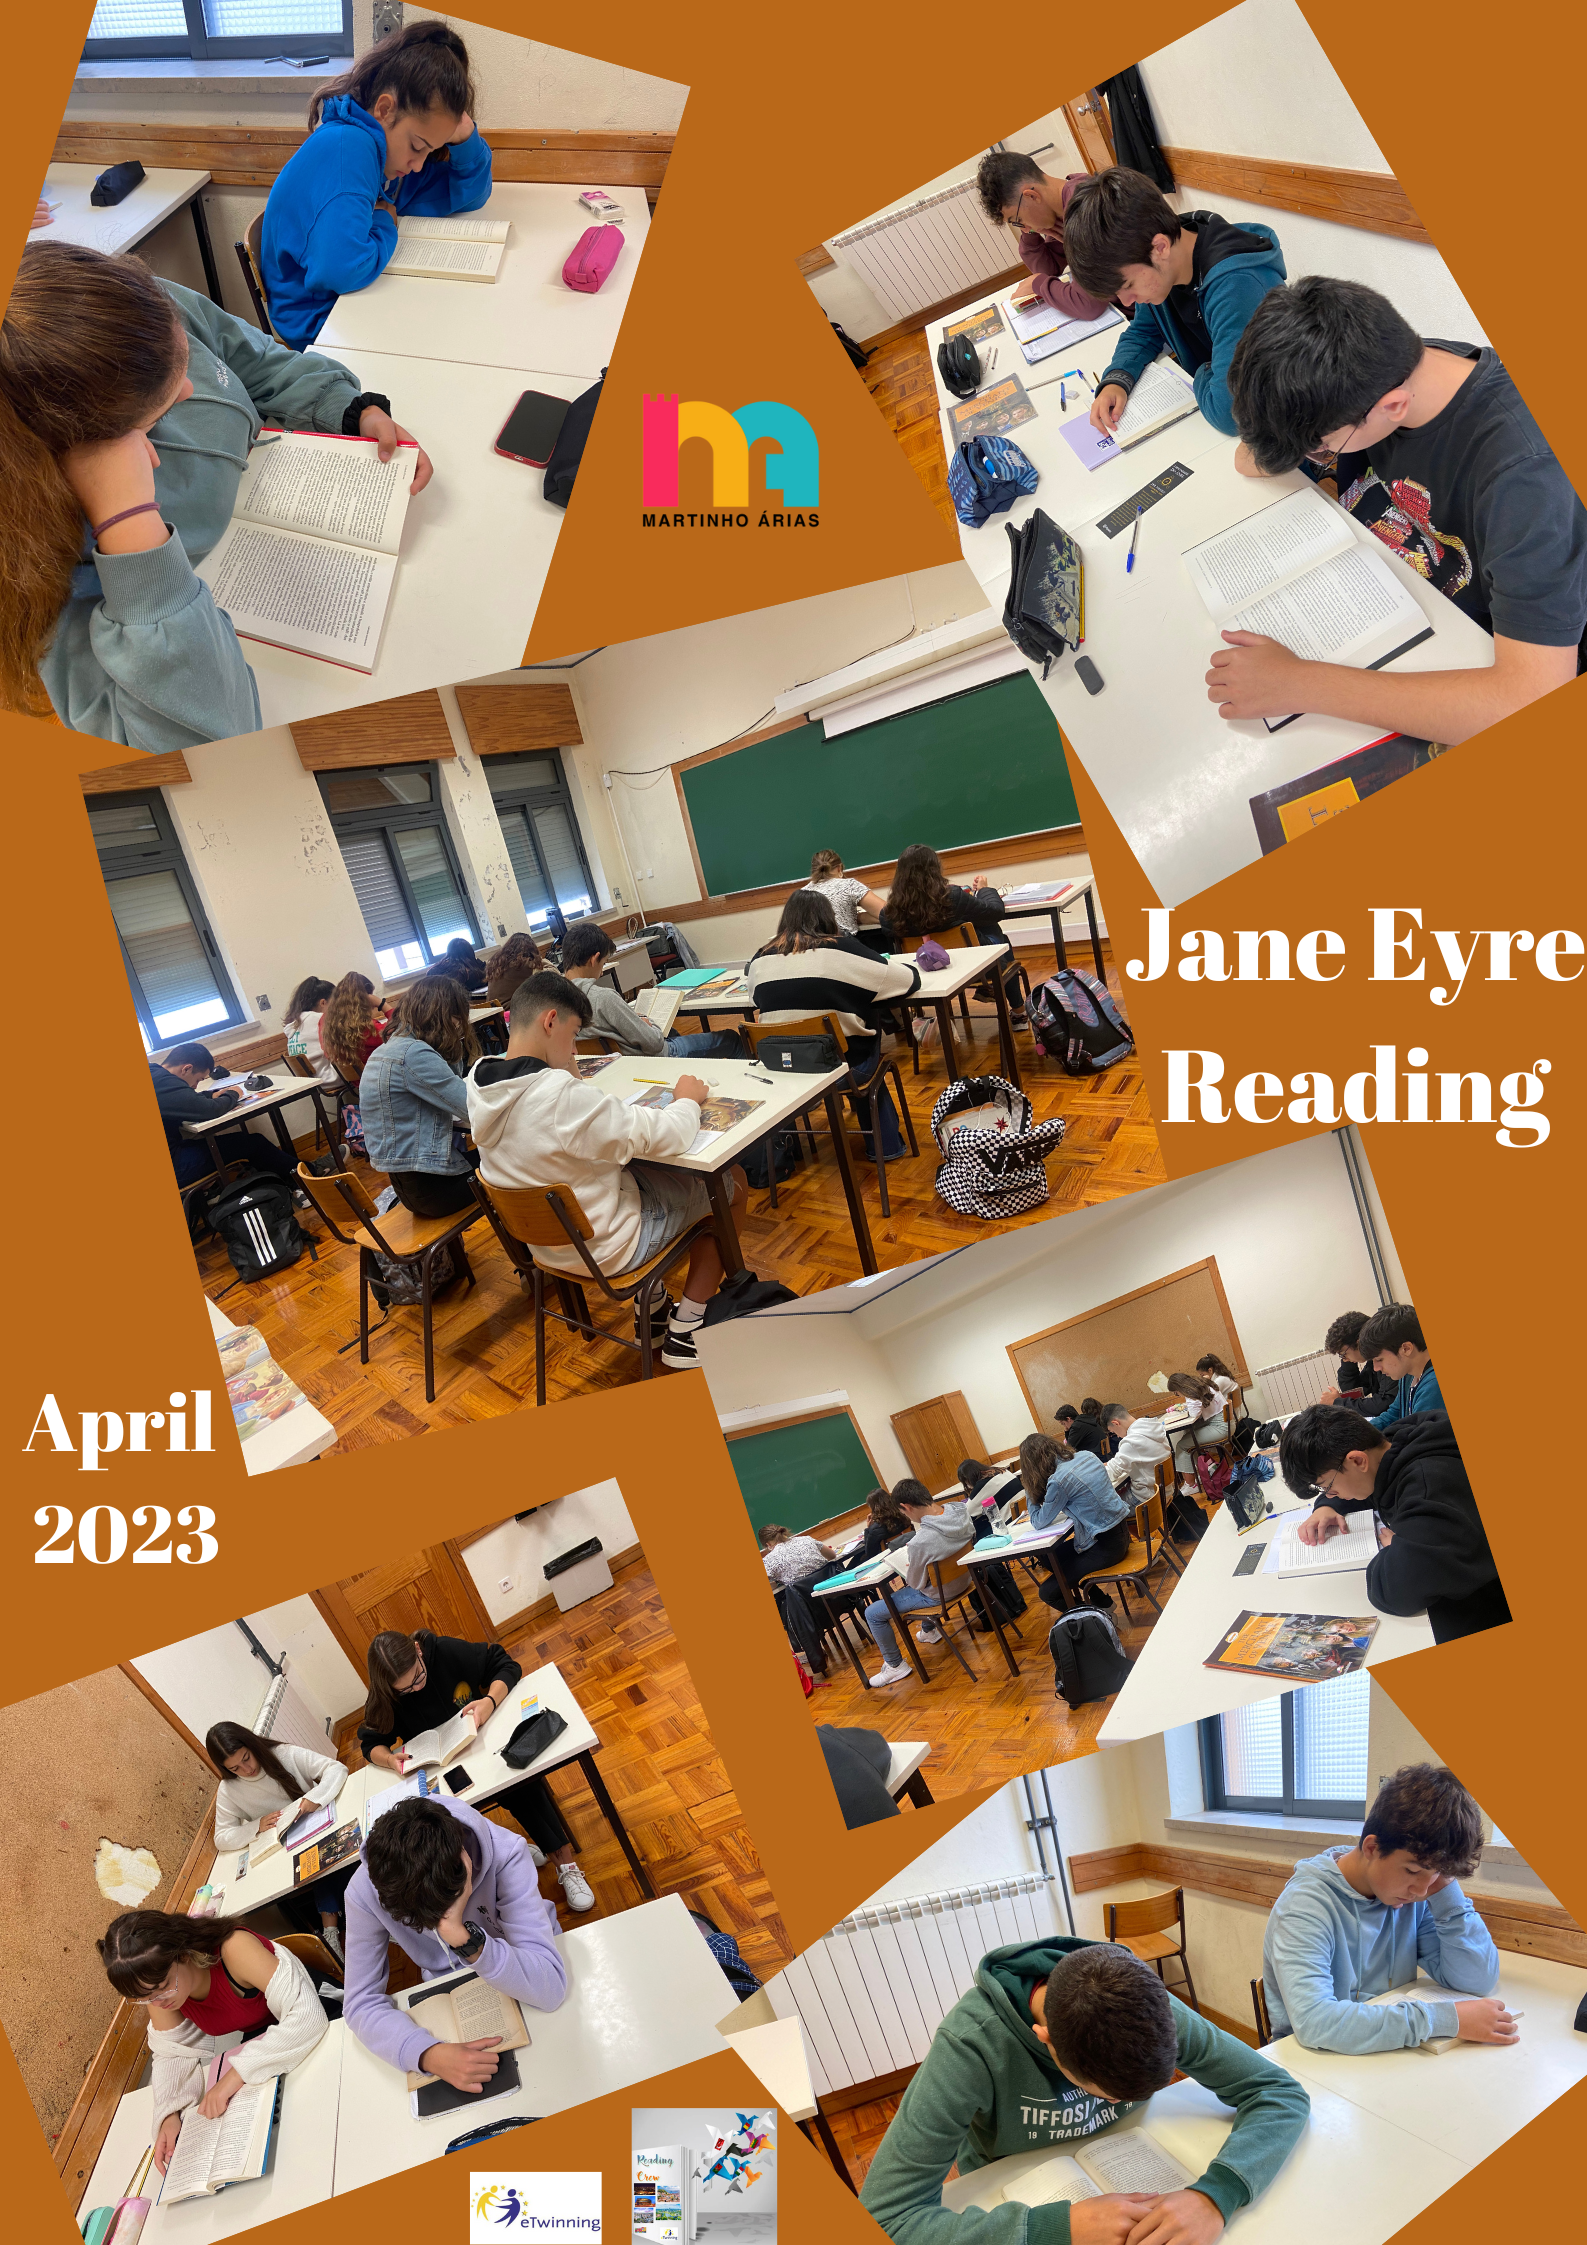 Jane Eyre Reading and prep work